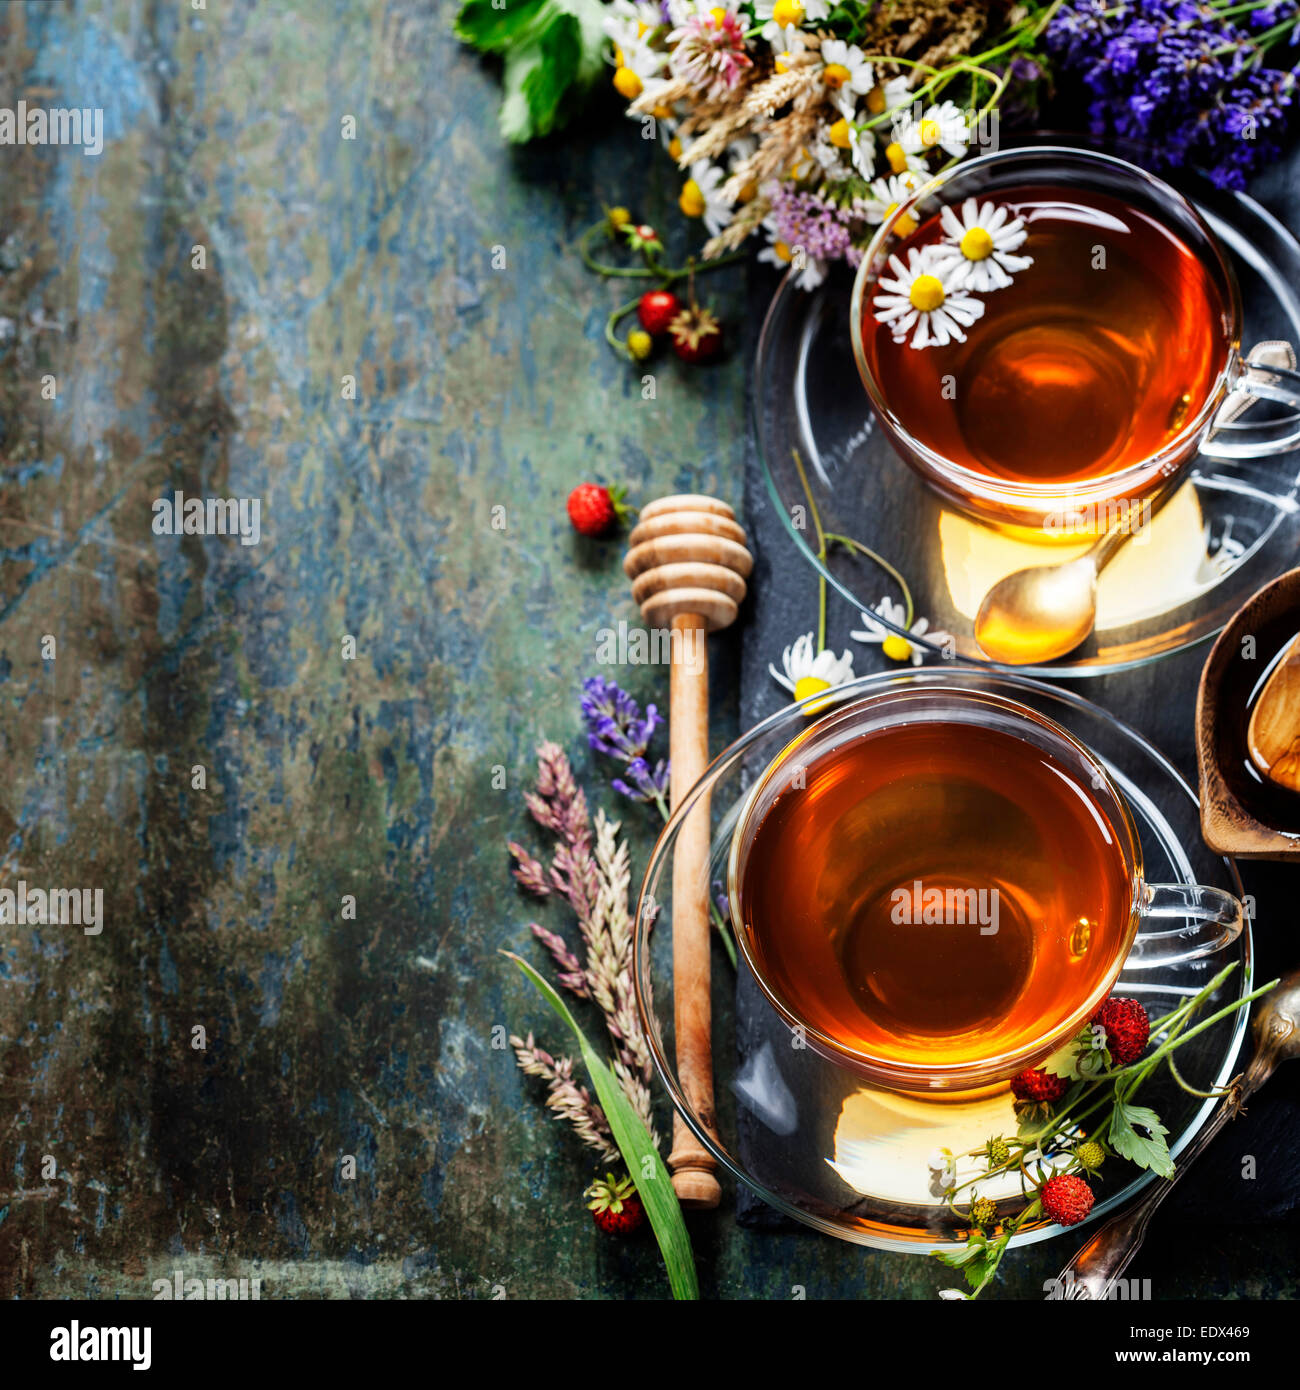 Herbal tea with honey, wild berry and flowers on wooden background Stock Photo